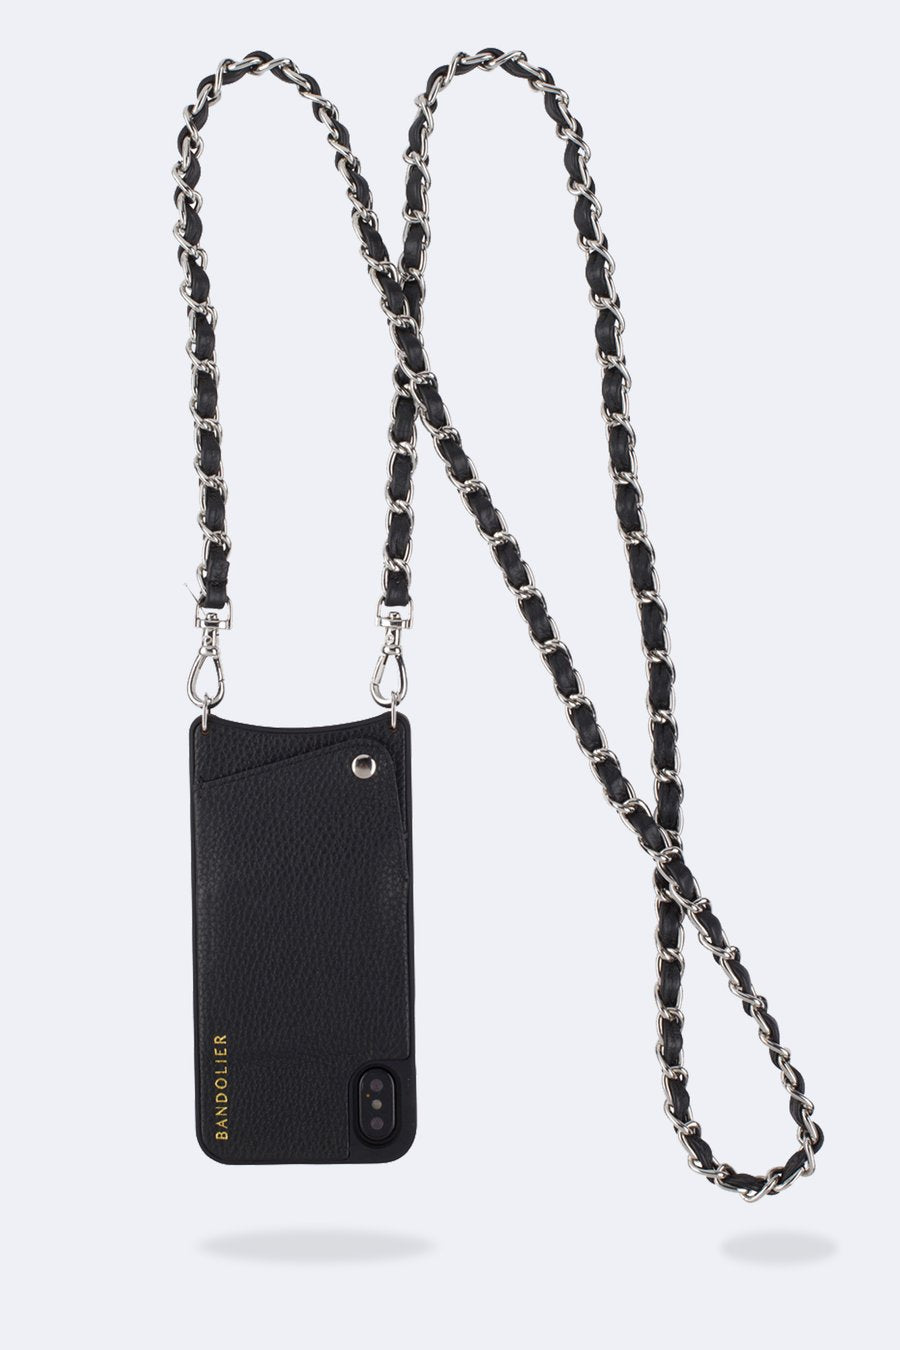 Bandolier - Lucy Black/Silver for 8/7/6 Plus